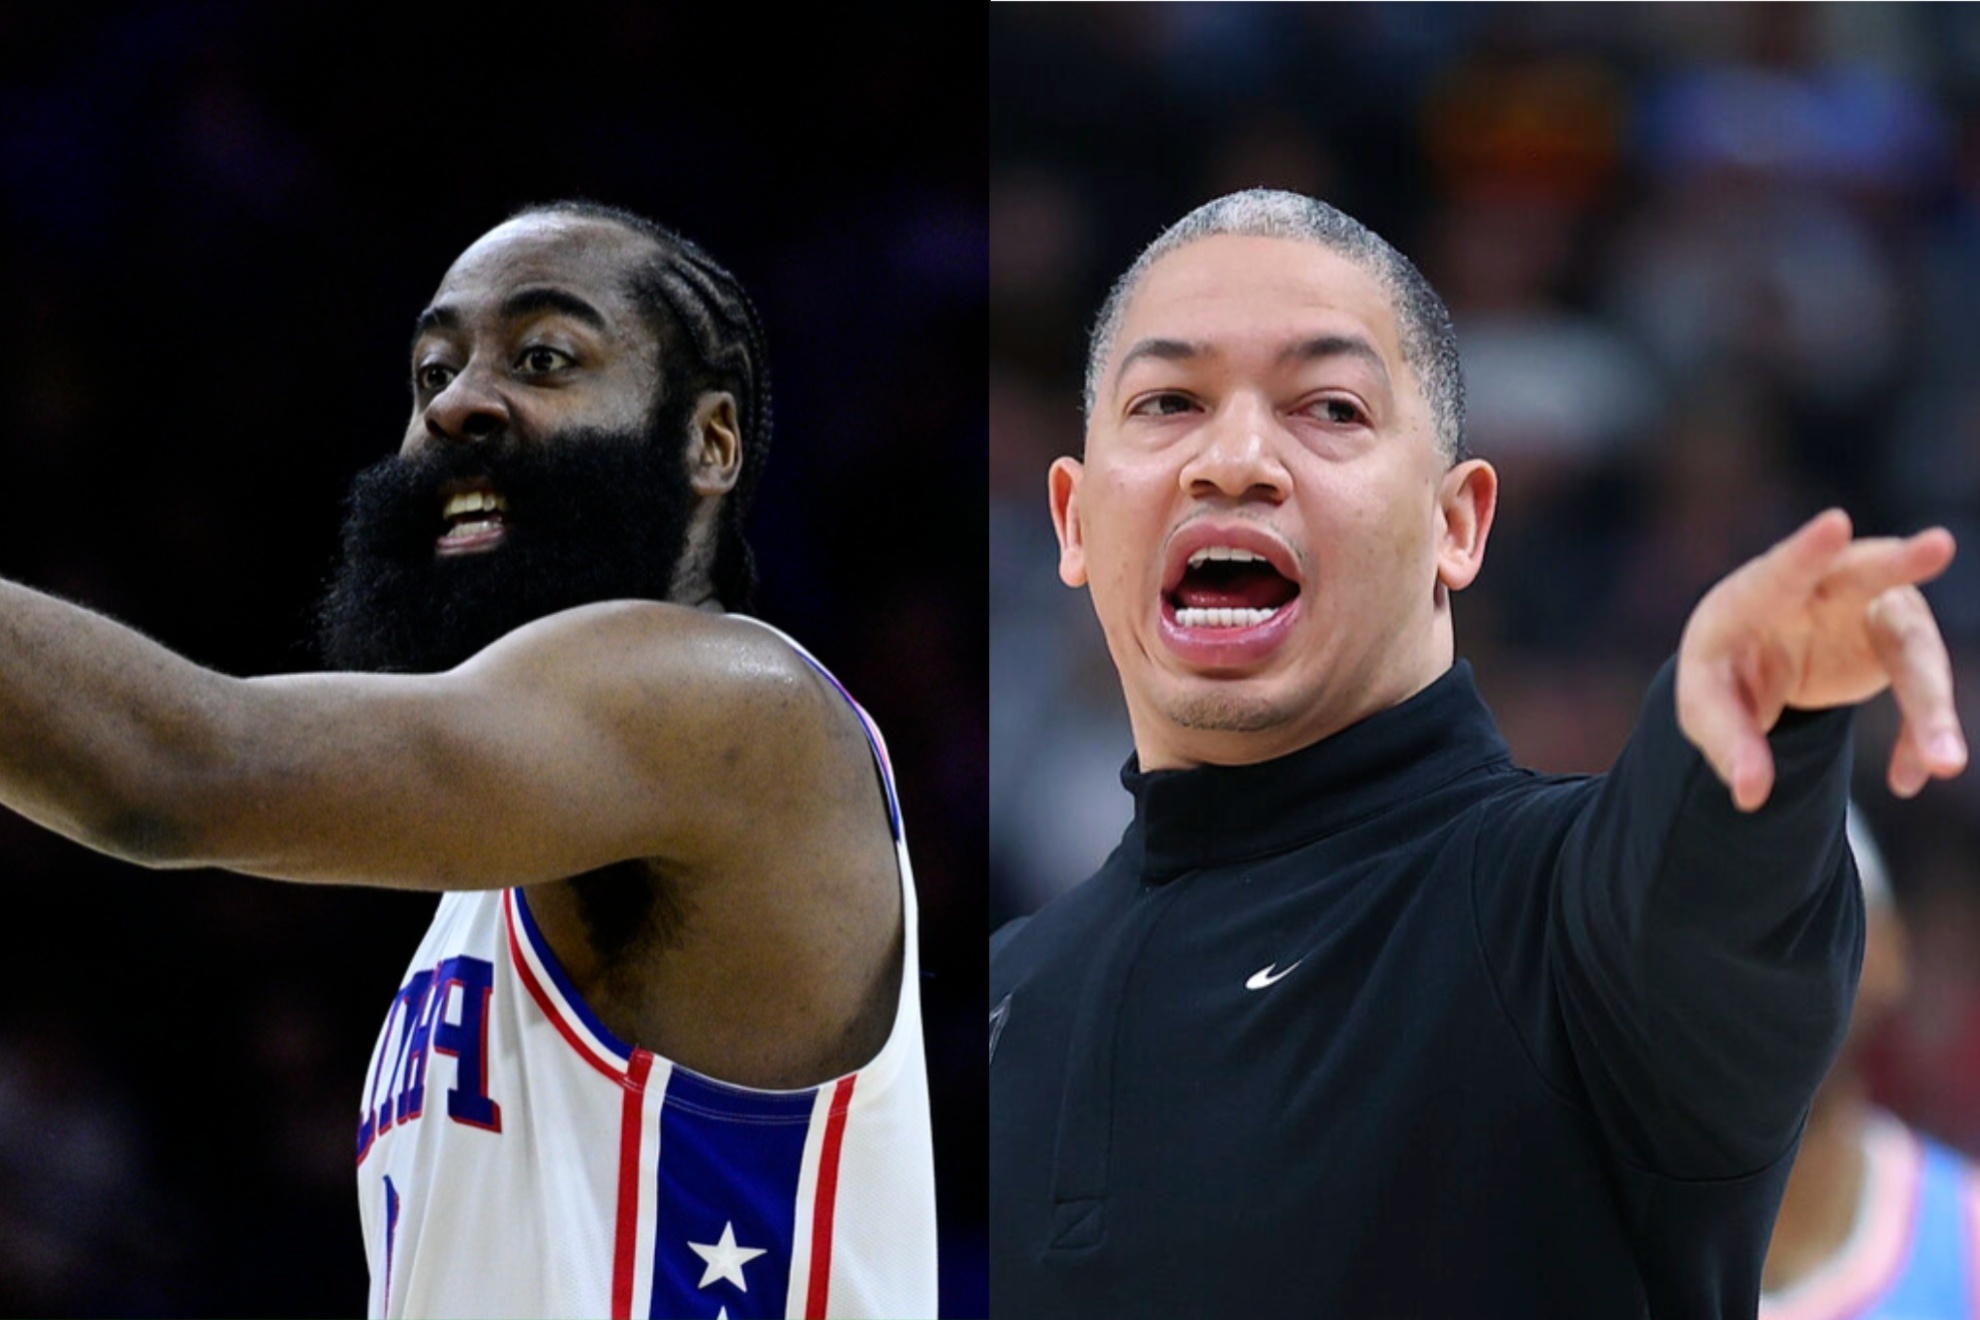 Coach Lue is losing patience with The Beard.